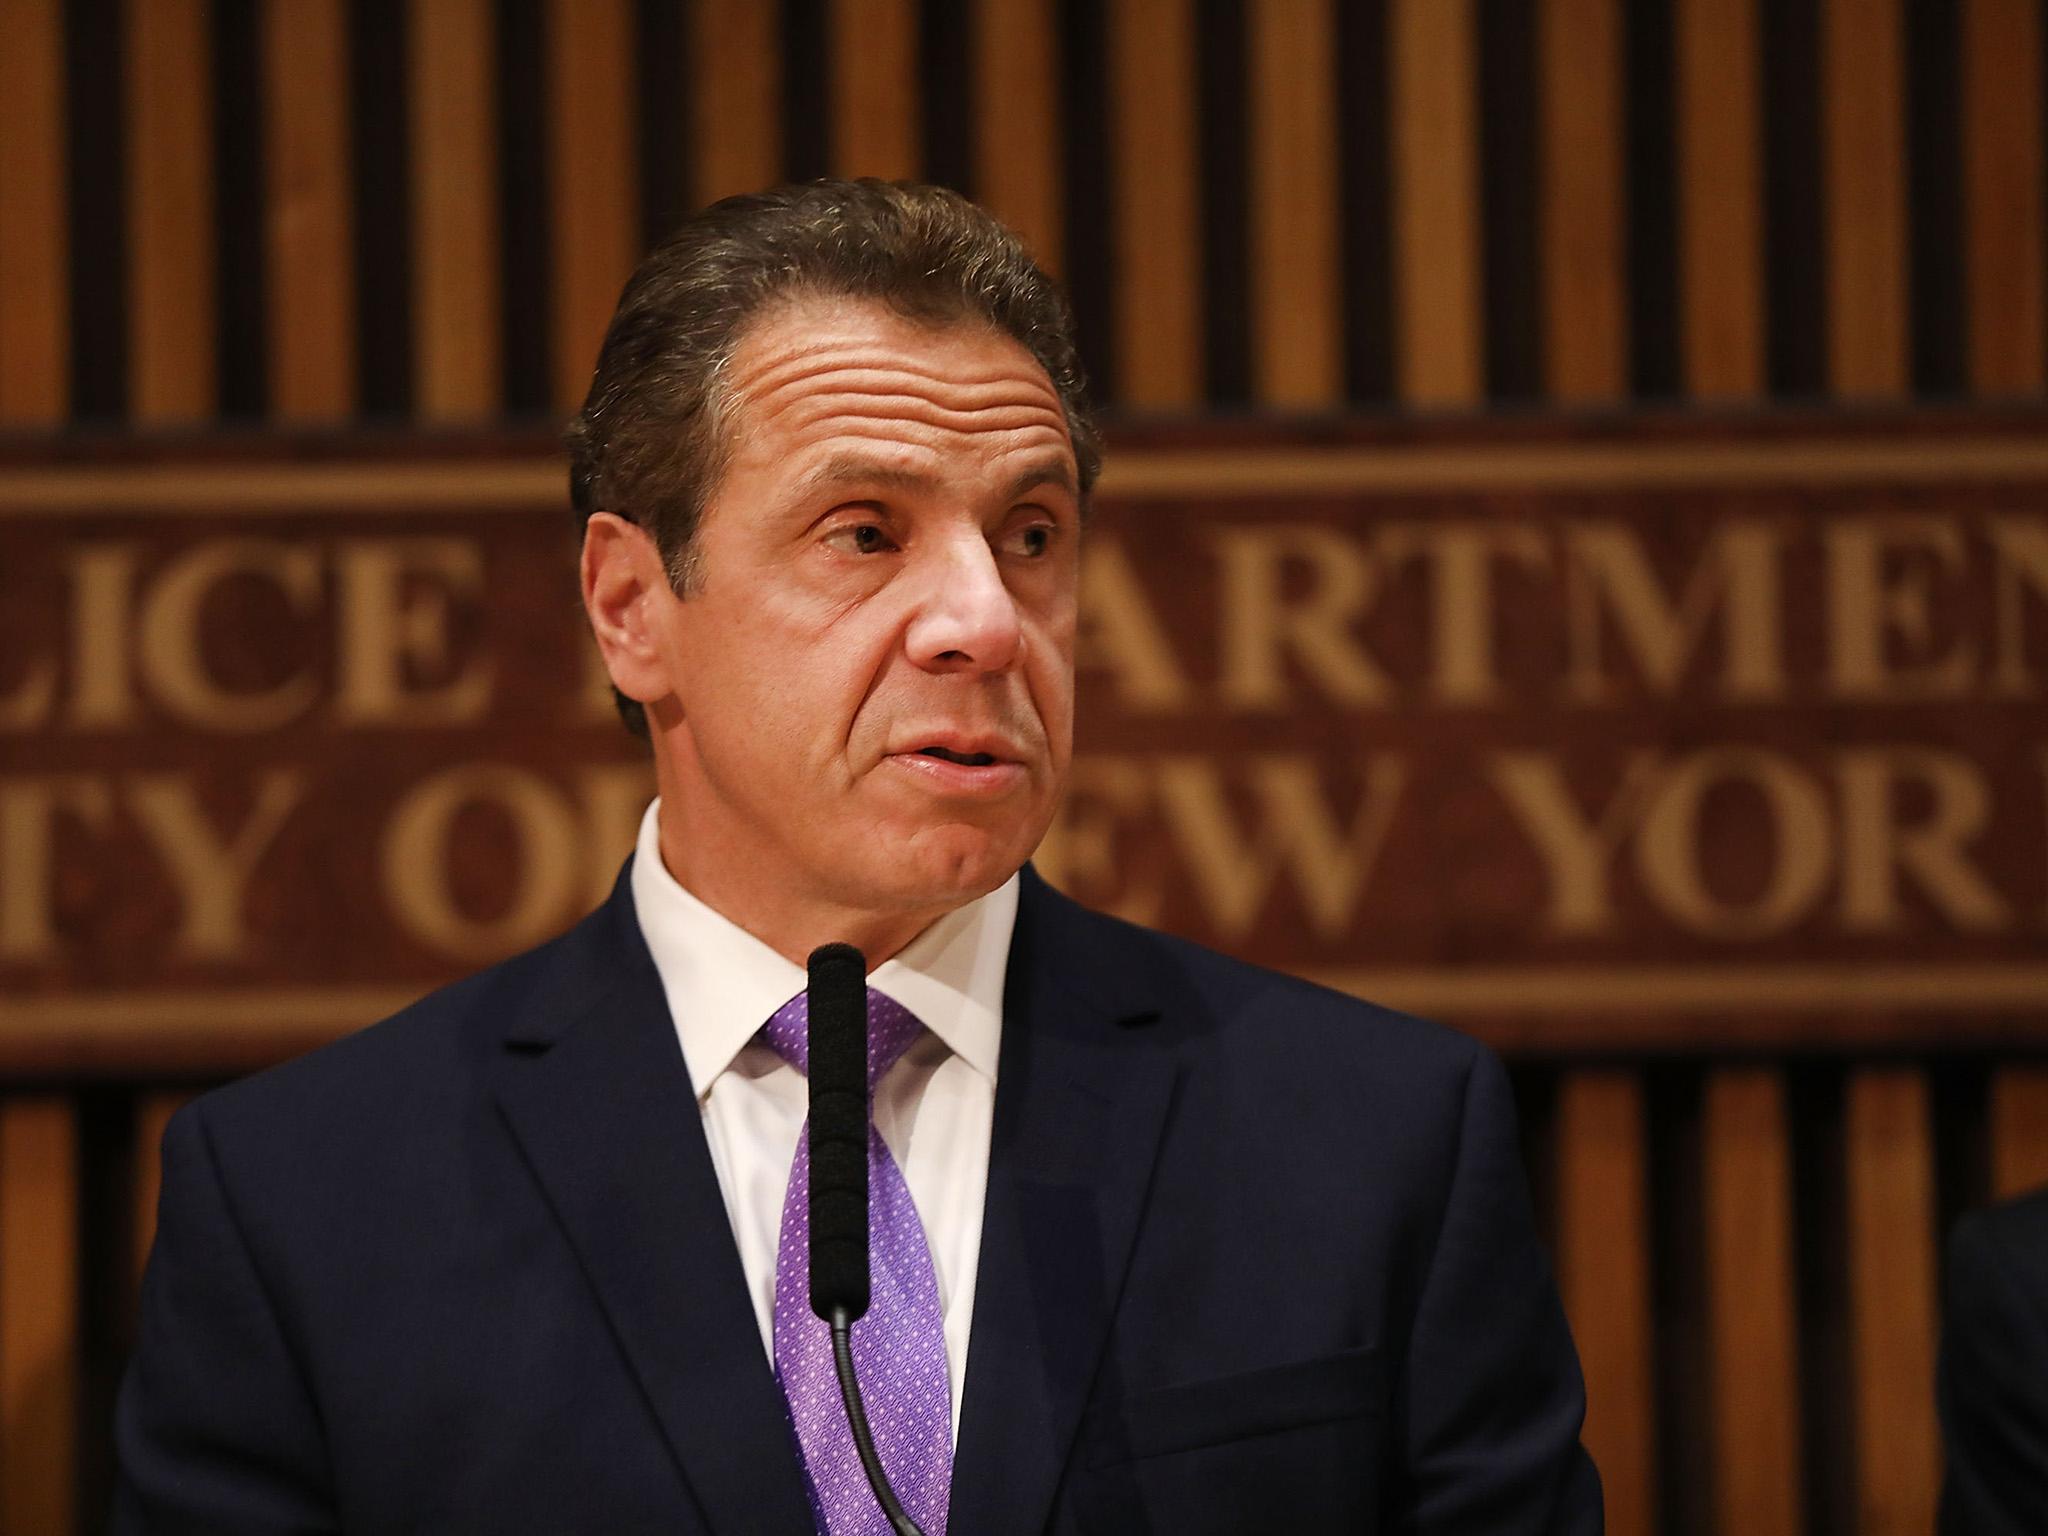 Andrew Cuomo says he is 'not bothered' that Donald Trump has not called him